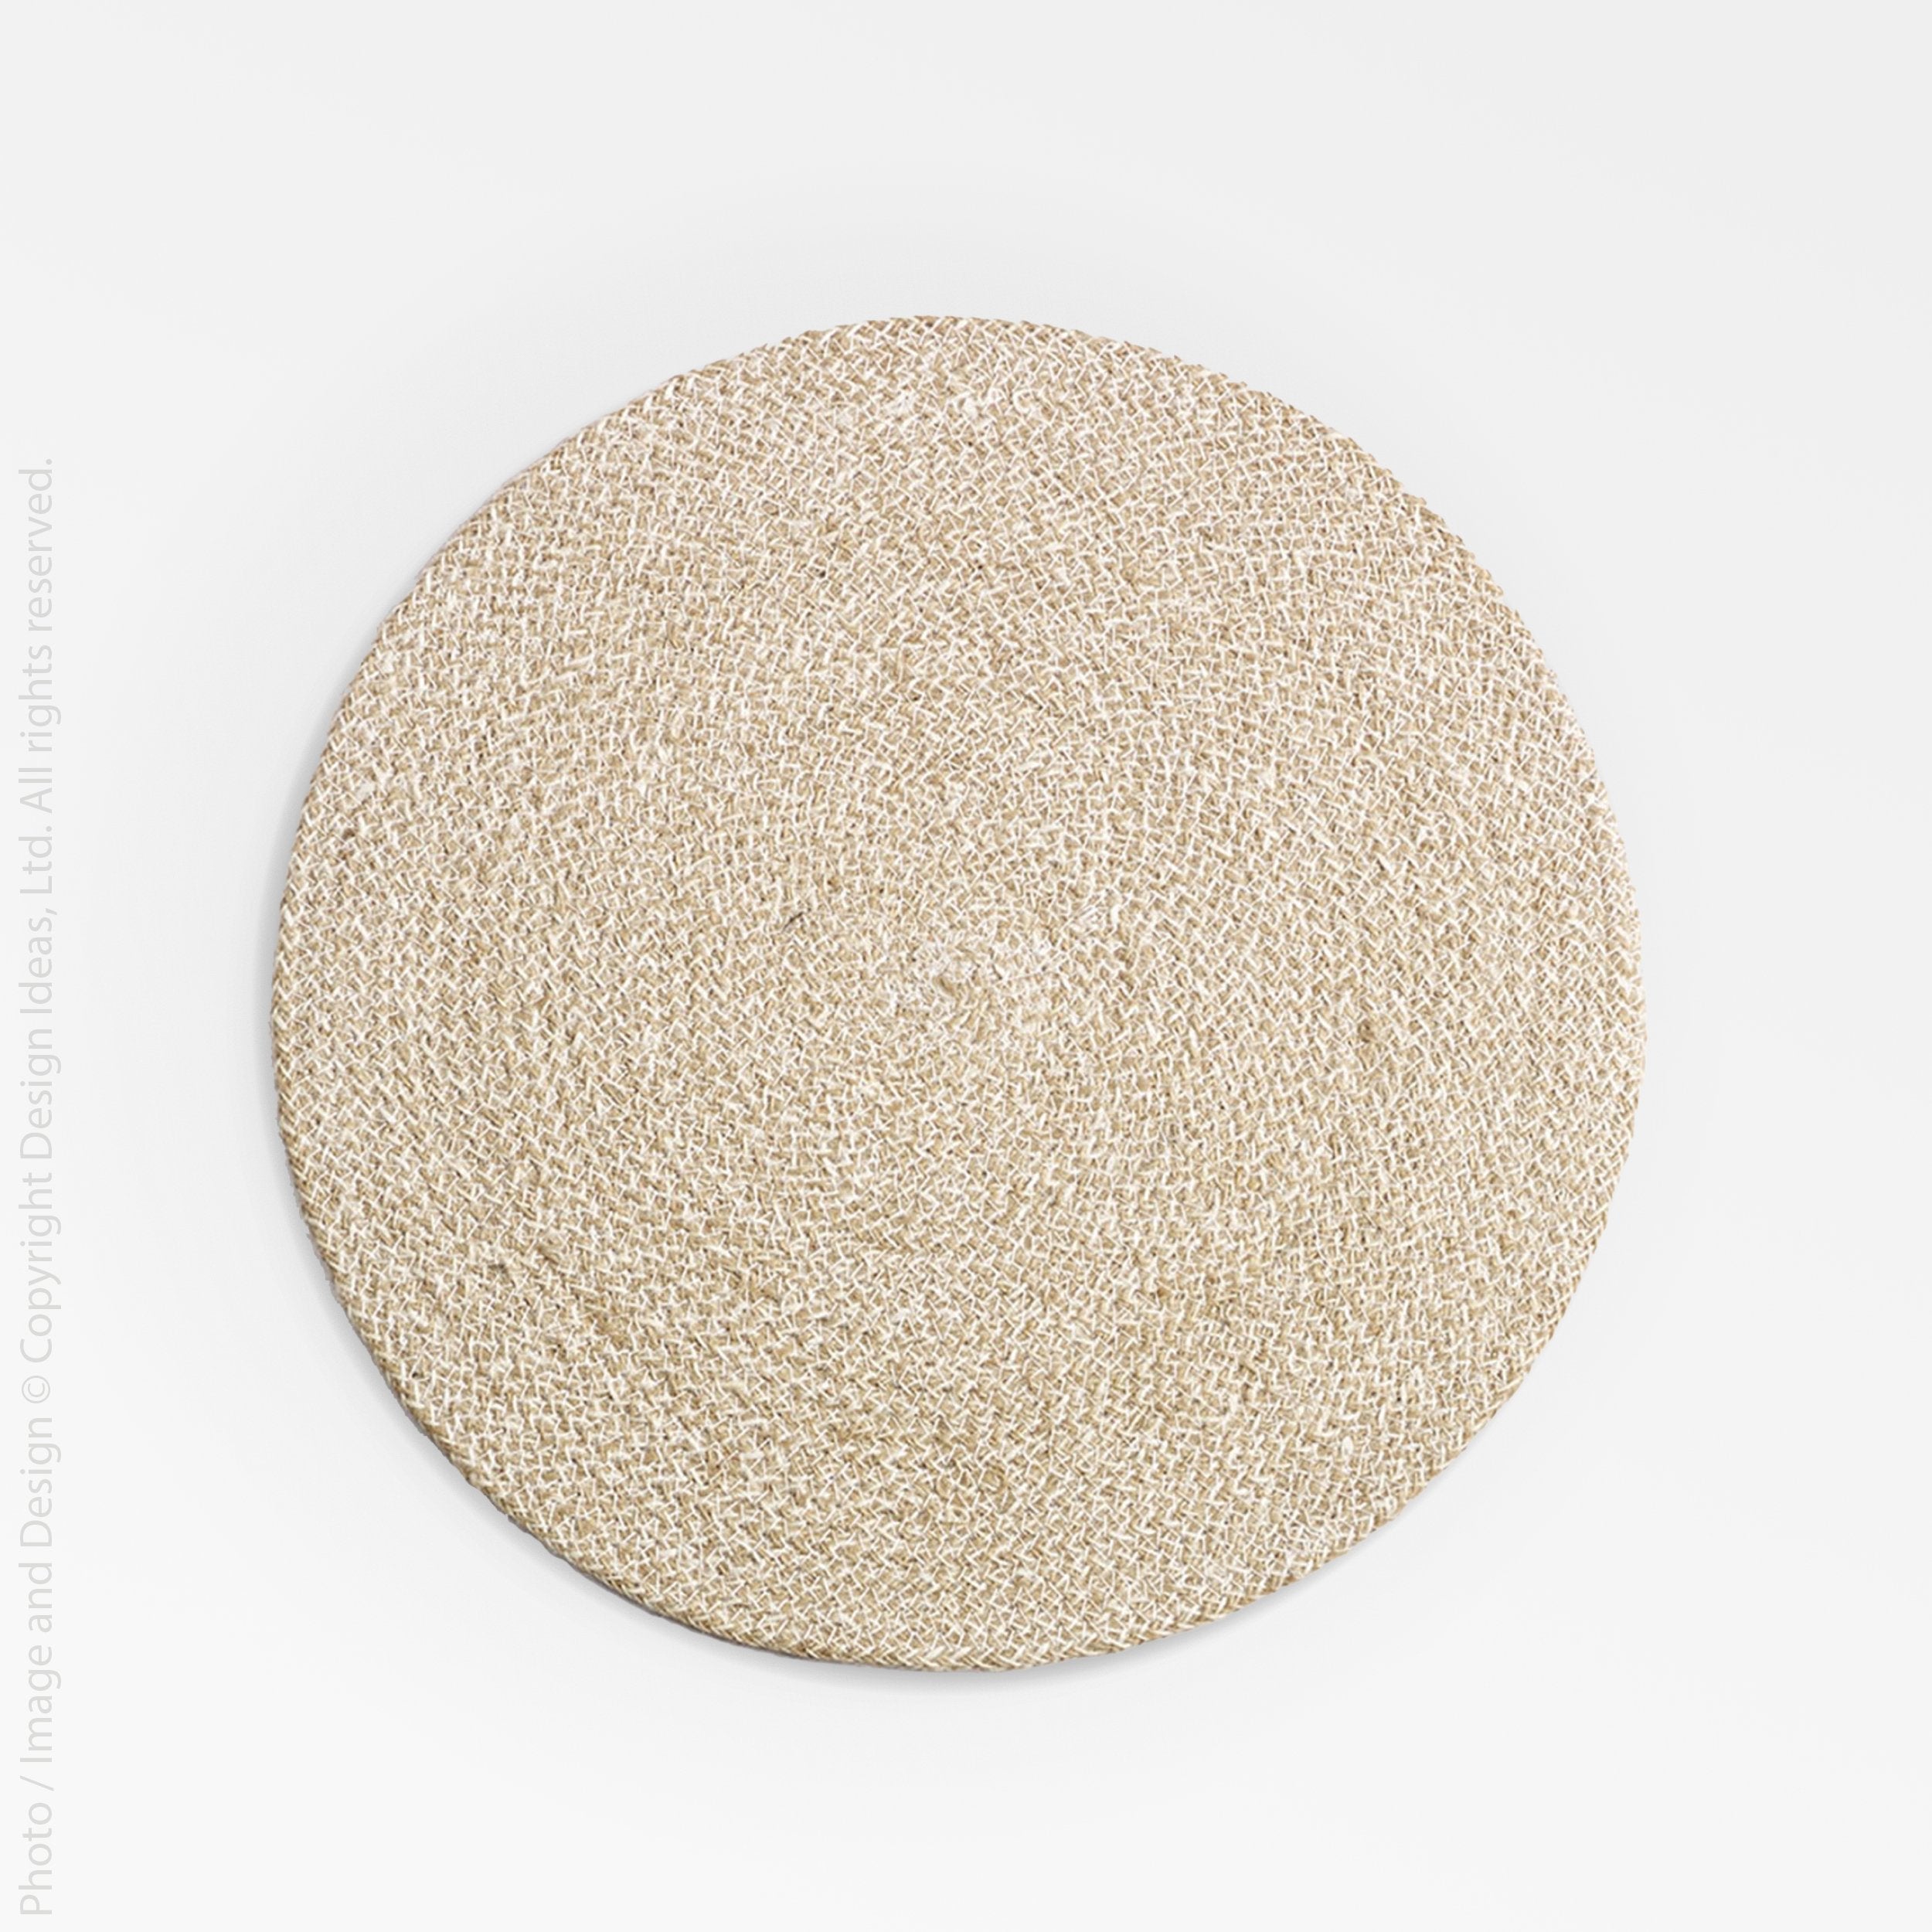 Melia™ Woven Jute Placemat - Sand | Image 1 | Premium Placemat from the Melia collection | made with Jute for long lasting use | texxture